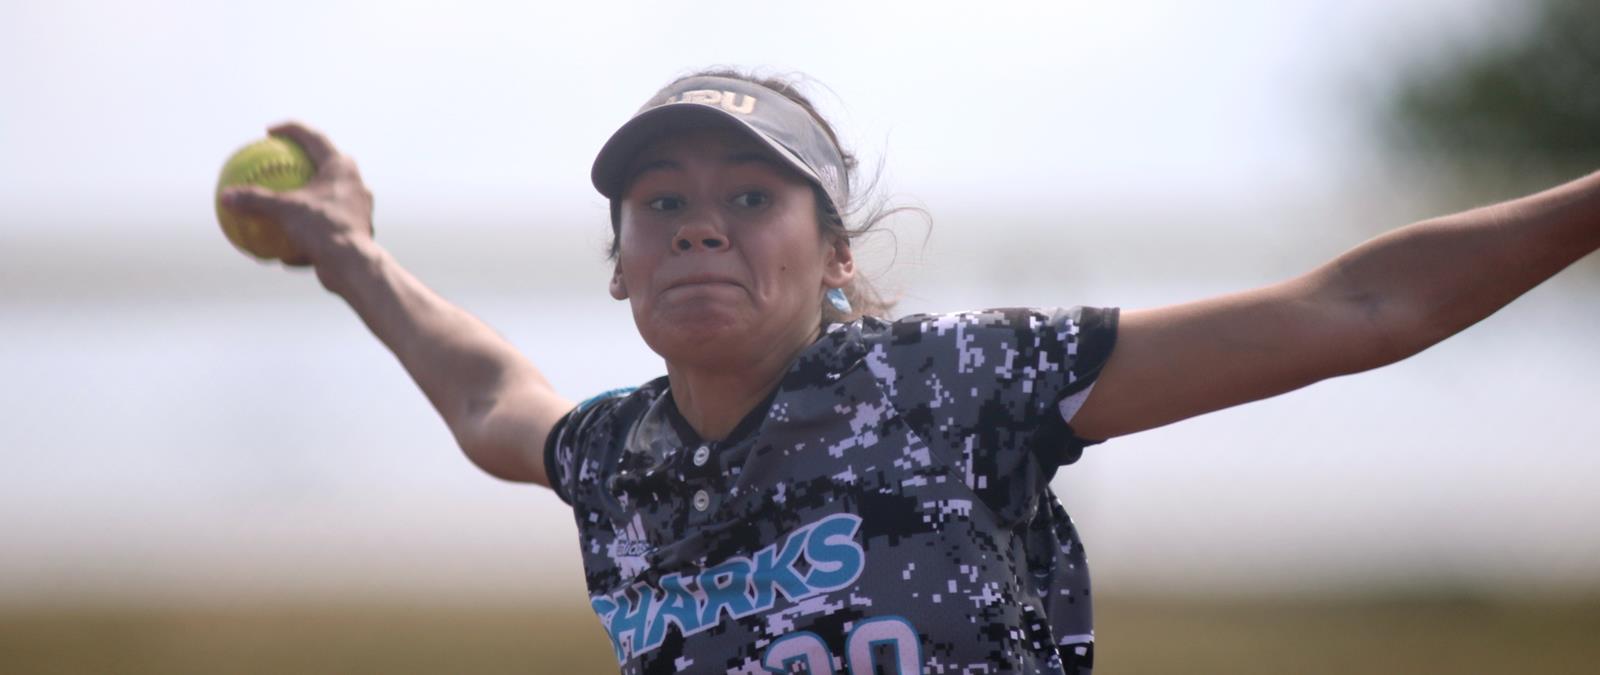 Jordan Curry (Navajo) picked up her 22nd complete game as Sharks Sweep Silverswords 2-1, 8-0